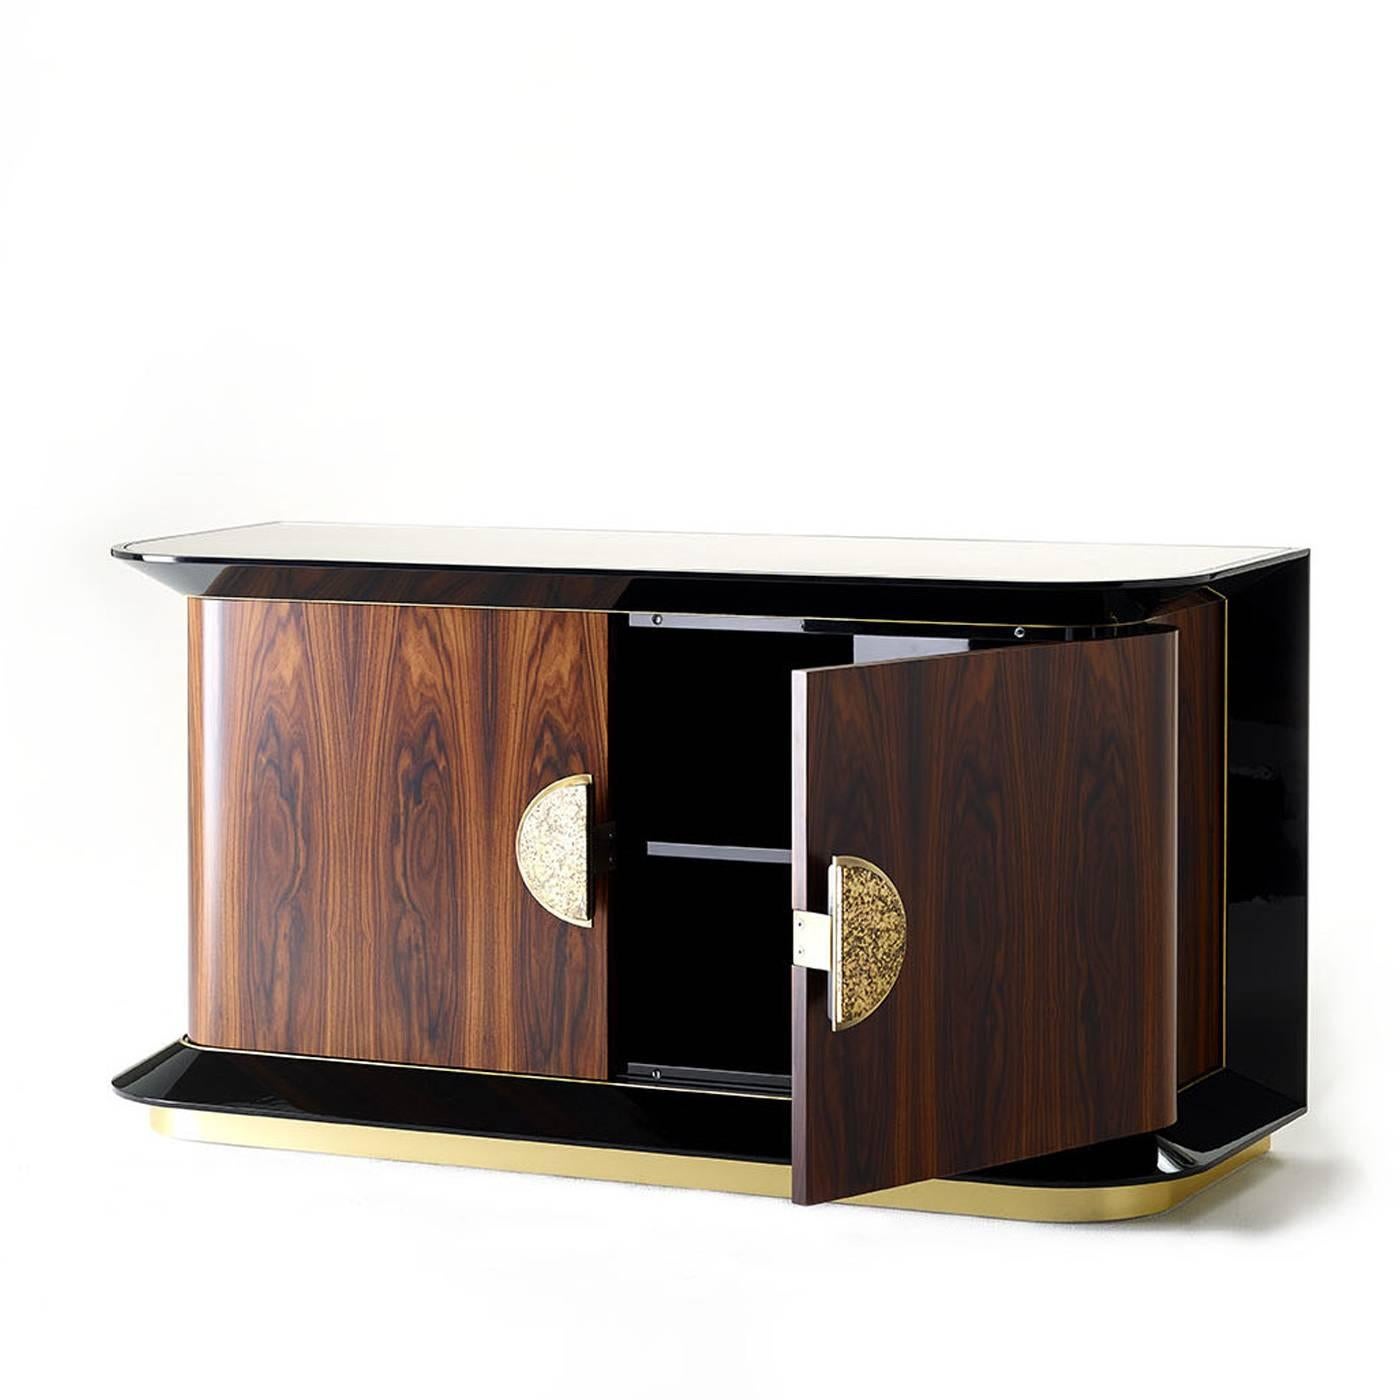 A lavish sideboard, designed by Studio 63 for Marioni, with double doors and ceramic elements in the middle and a glossy black wooden frame. The interior is done in a contrasting color, but this piece is also available in different finishings and